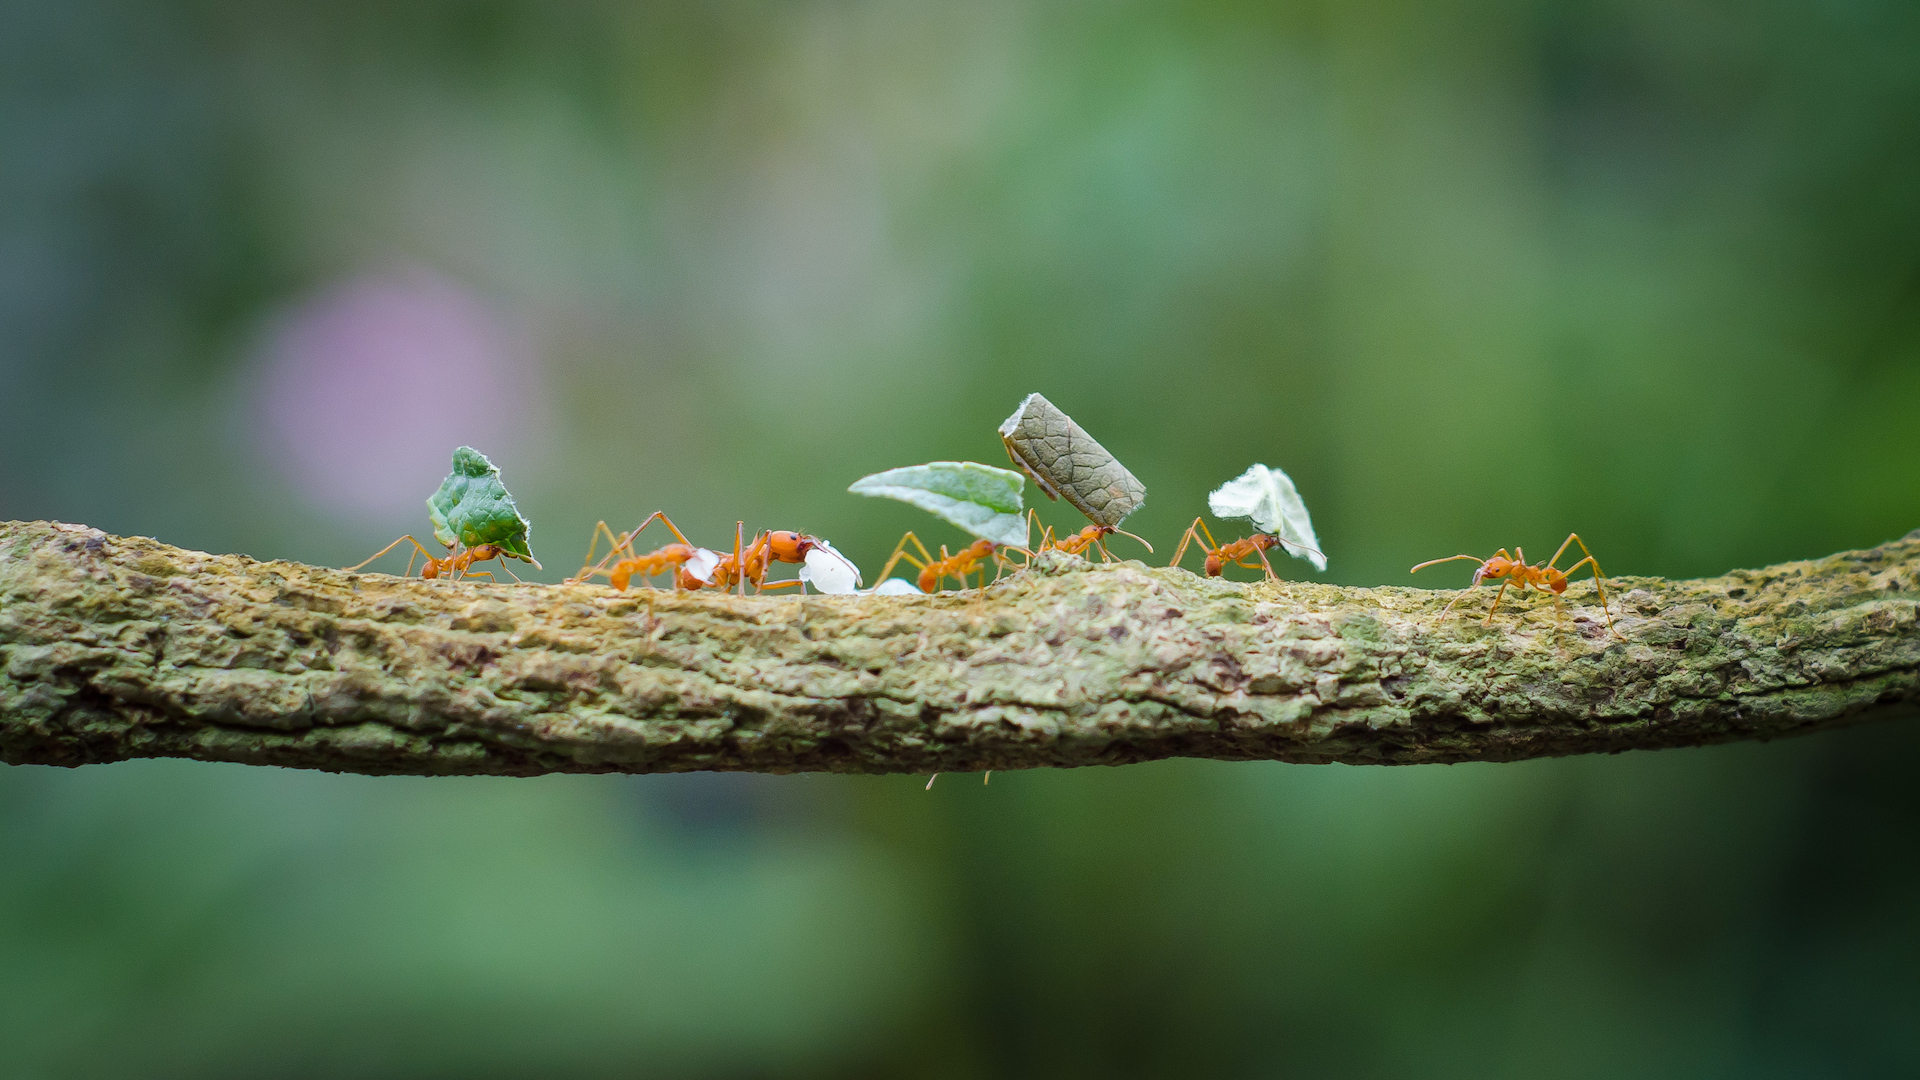 A close-up photo of leaf-cutter ants walking in a line carrying leaves on a branch